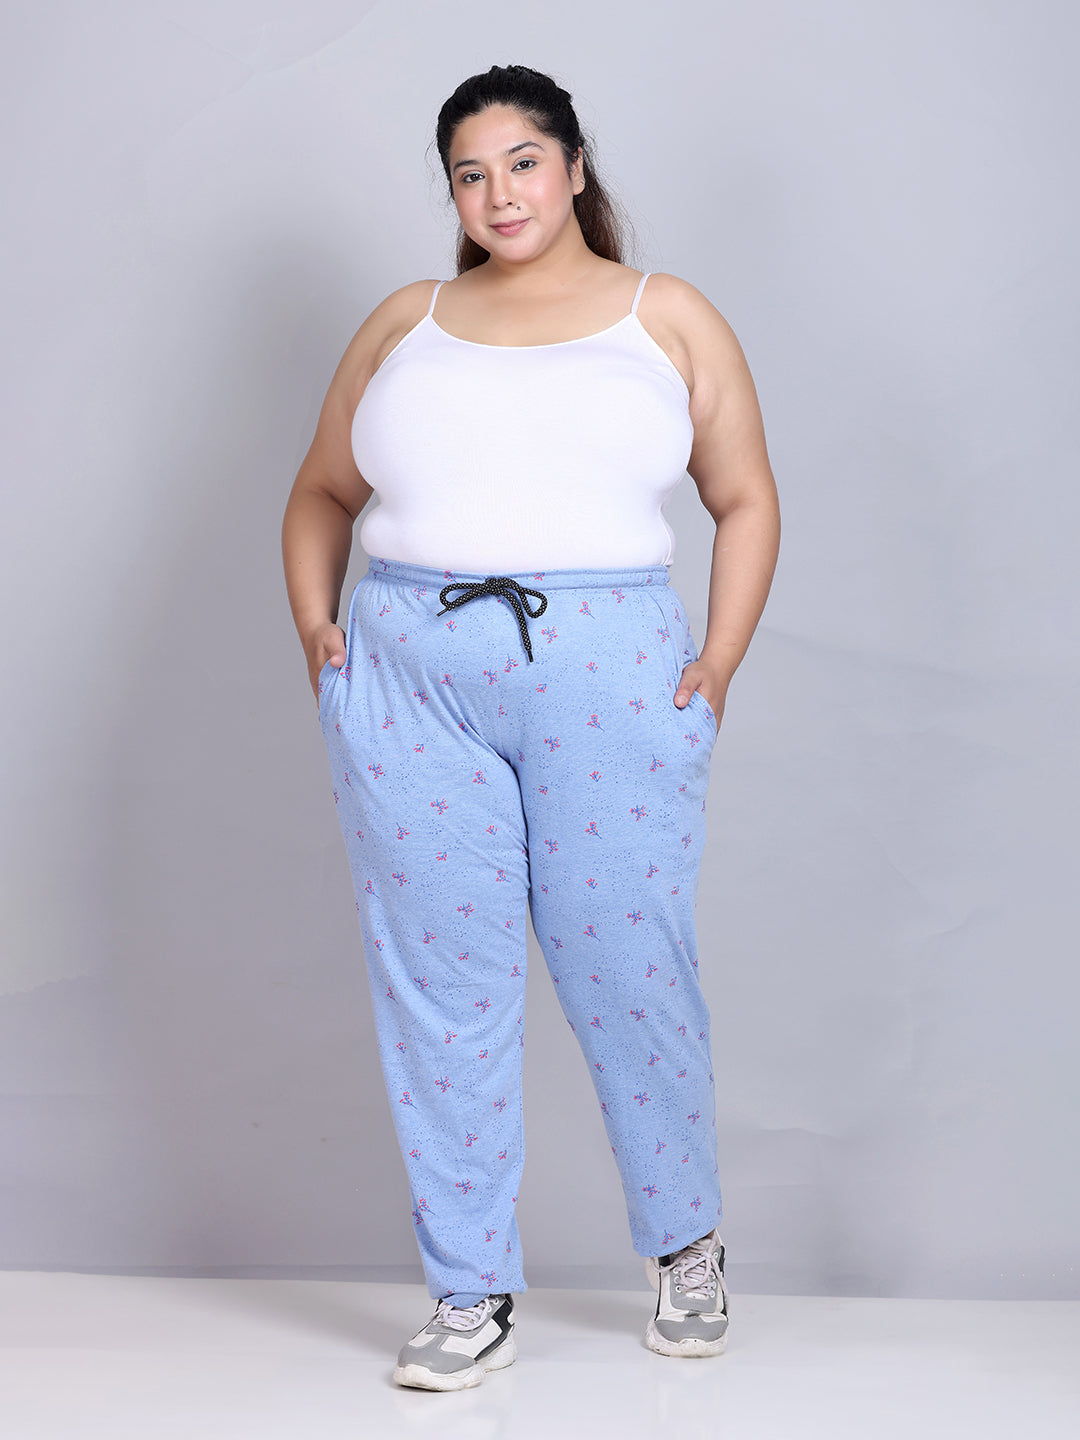 Buy Women & Girls Track Pant, Lower Pajama, Cotton Printed Lounge Wear Soft  Cotton Night Wear X-Large, 2XL,3XL & 4XL(Pack of 3 & 5) Multicolor(Prints  May Varry) (3, X-Large) at Amazon.in